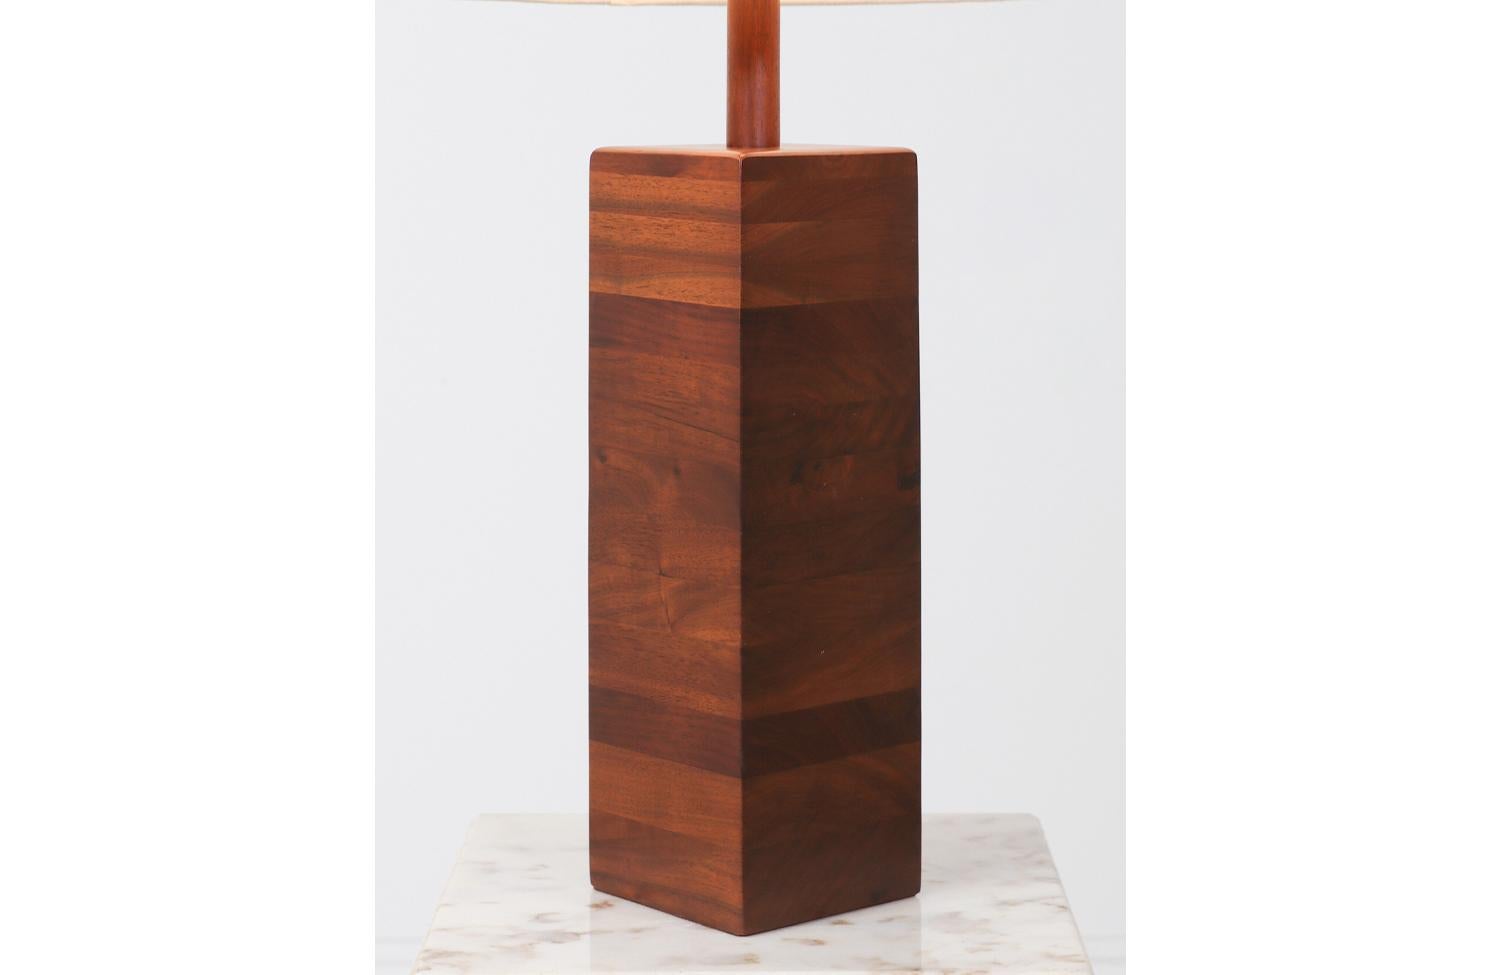 Expertly Restored - Gordon & Jane Martz Walnut Table Lamp for Marshall Studios In Excellent Condition For Sale In Los Angeles, CA